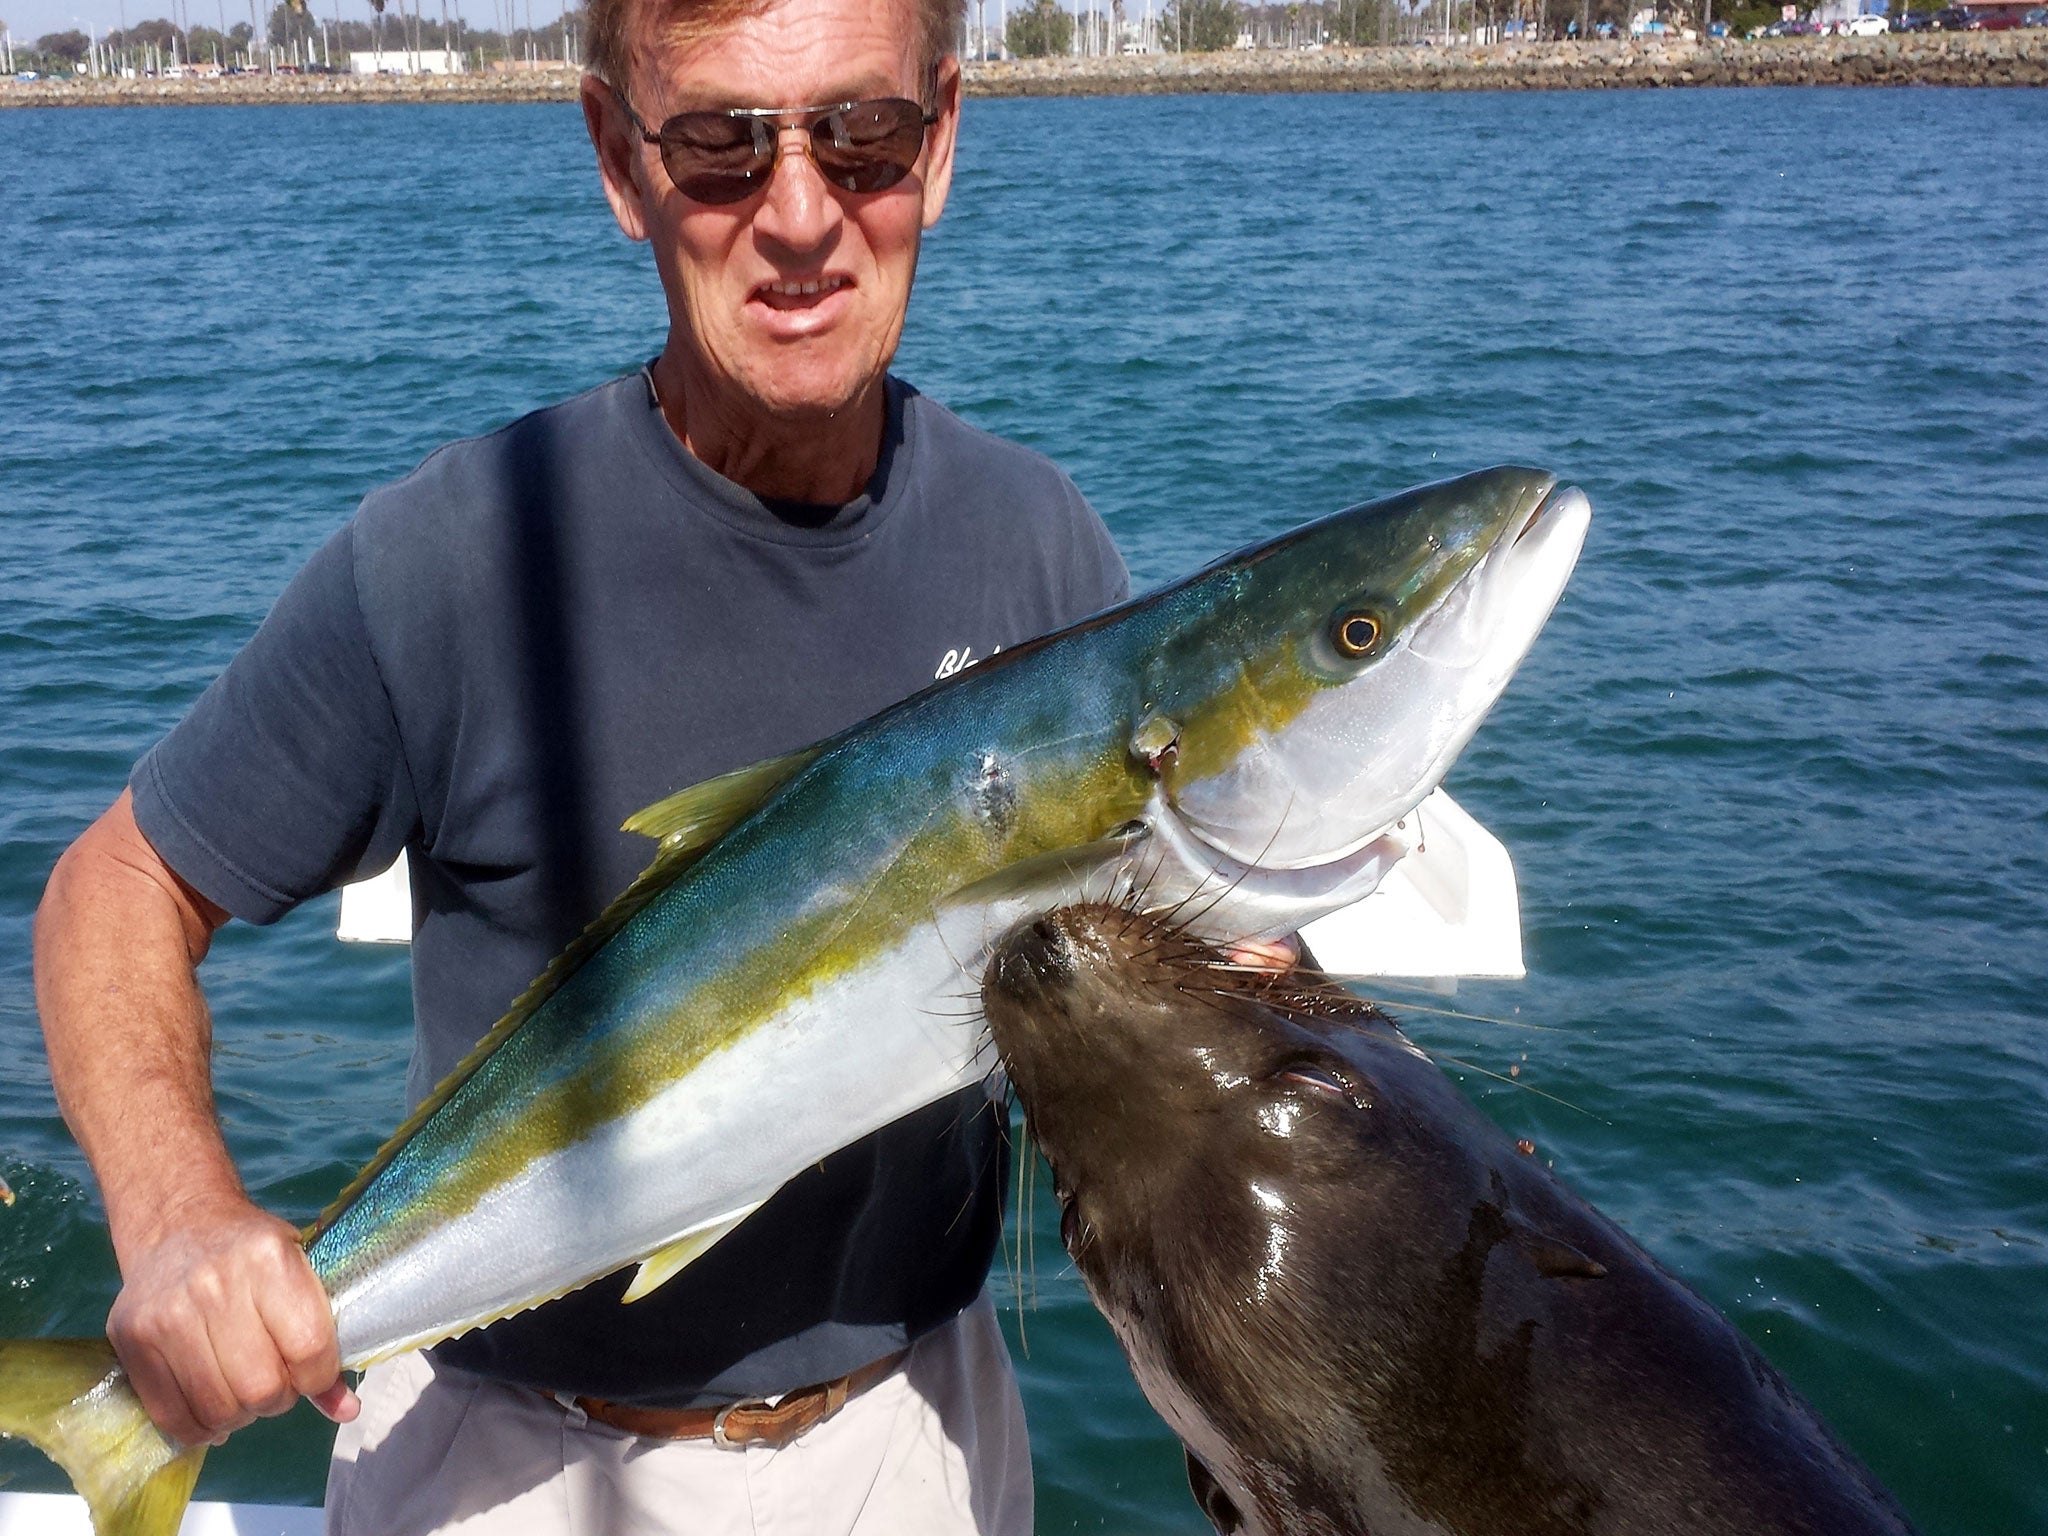 Dan Carlin holding a recently-caught yellowtail at the moment a sea lion leaped up to grab the fish - and him - at Mission Bay in San Diego.